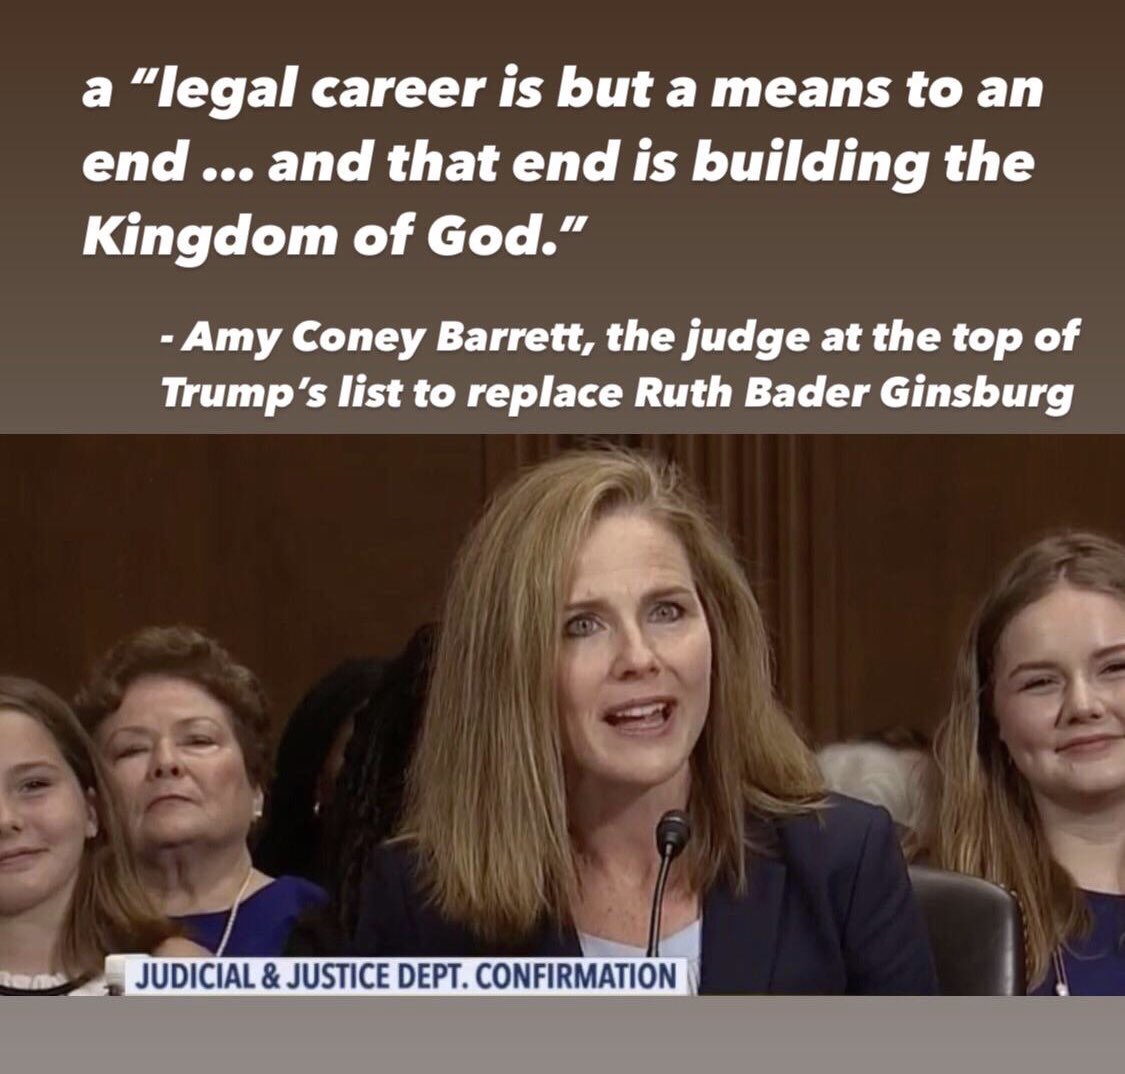 7/17Notable groups & organizations who have rejected  #SCOTUS nominee Amy Coney Barrett cont.GLBTQ Legal Advocates & Defenders (GLAD)GLSENImmigration Equality Action FundNational Center for Lesbian RightsNational Center for Transgender EqualityNational LGBT Bar Association